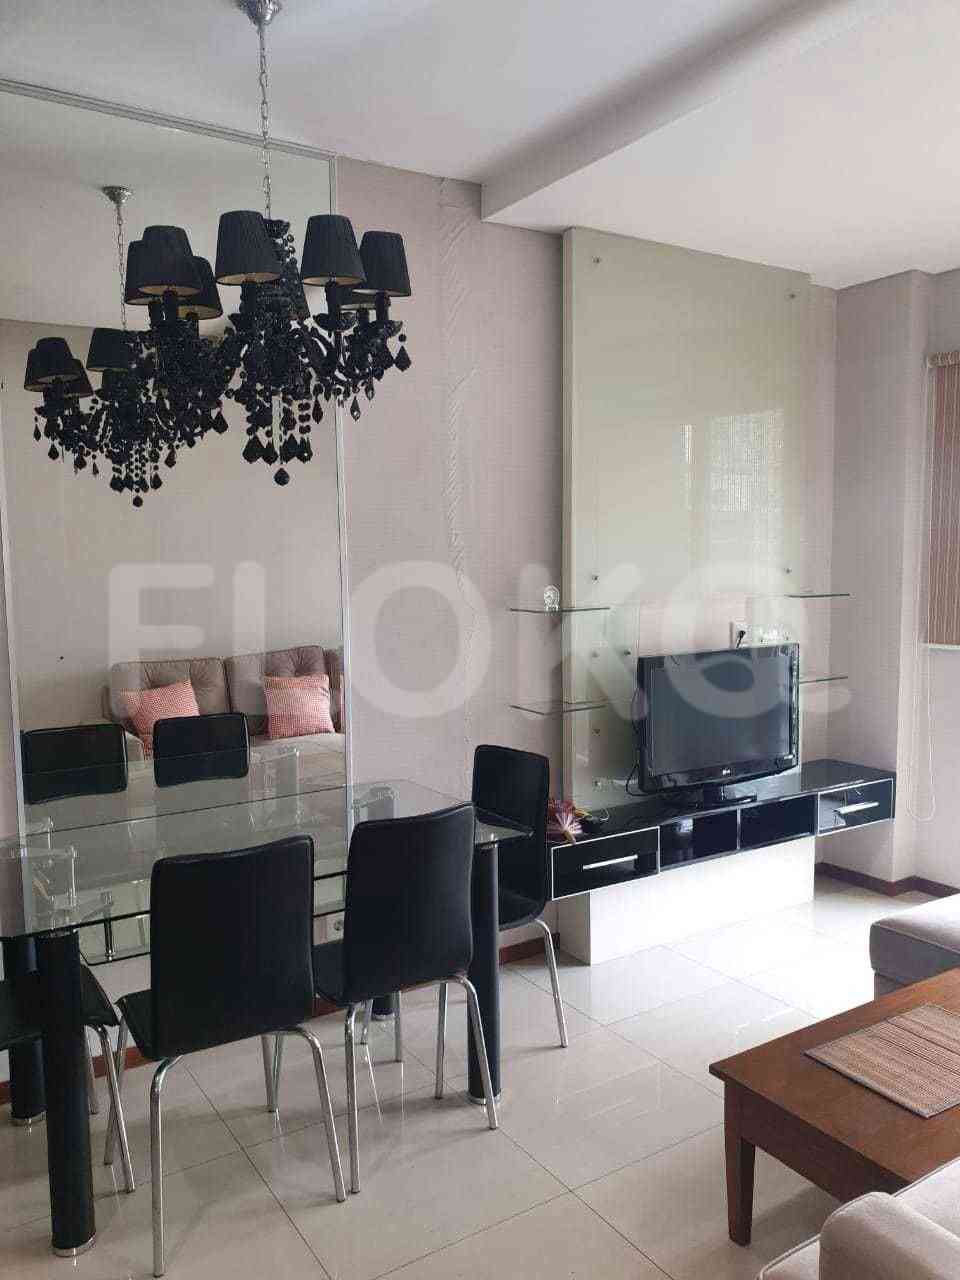 2 Bedroom on 8th Floor for Rent in Thamrin Residence Apartment - fth05c 3